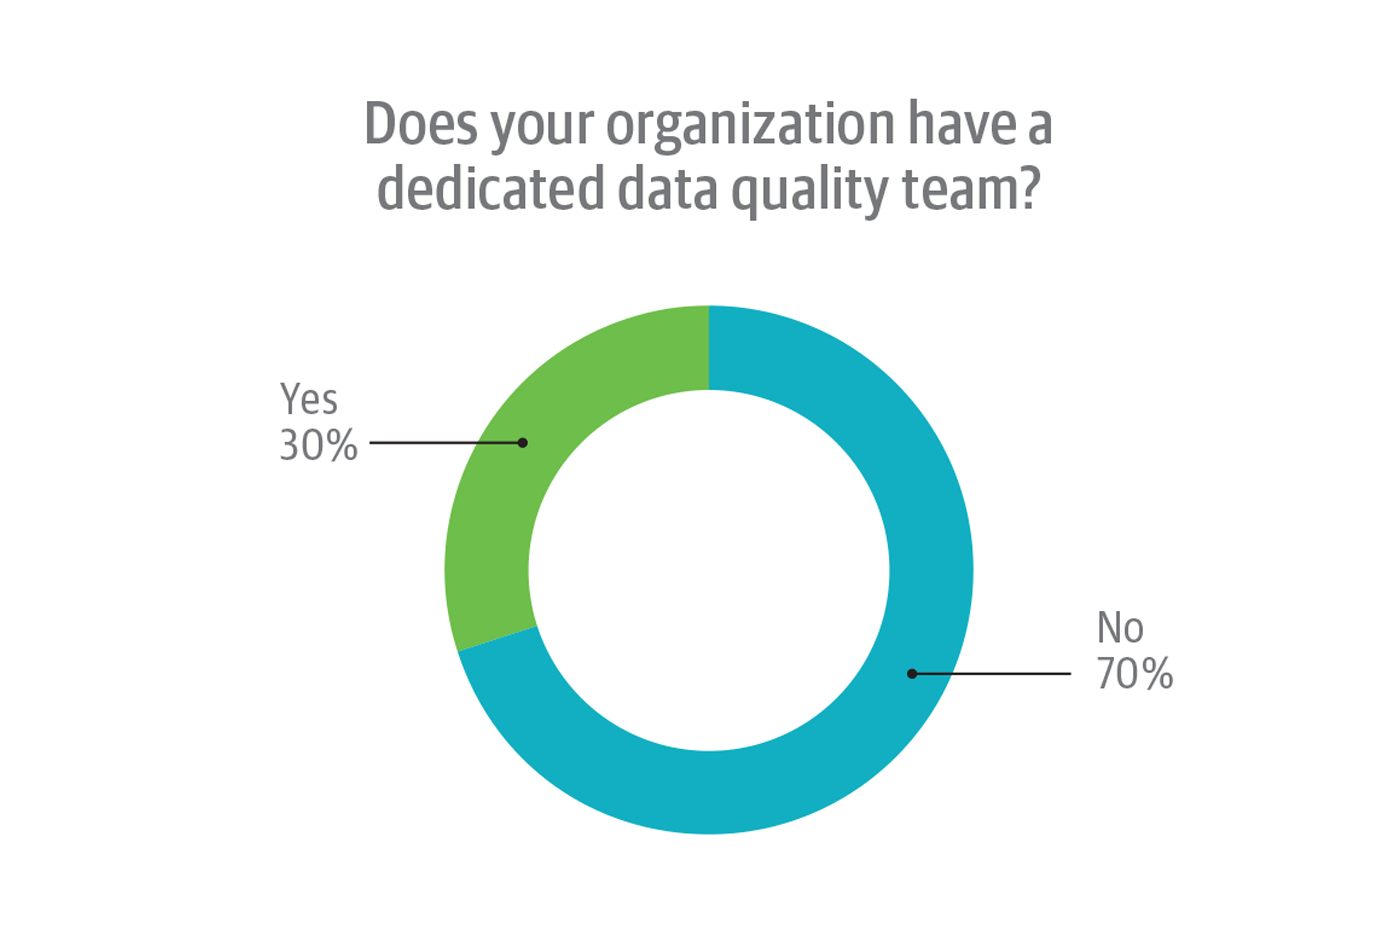 Presence of dedicated data quality teams in organizations